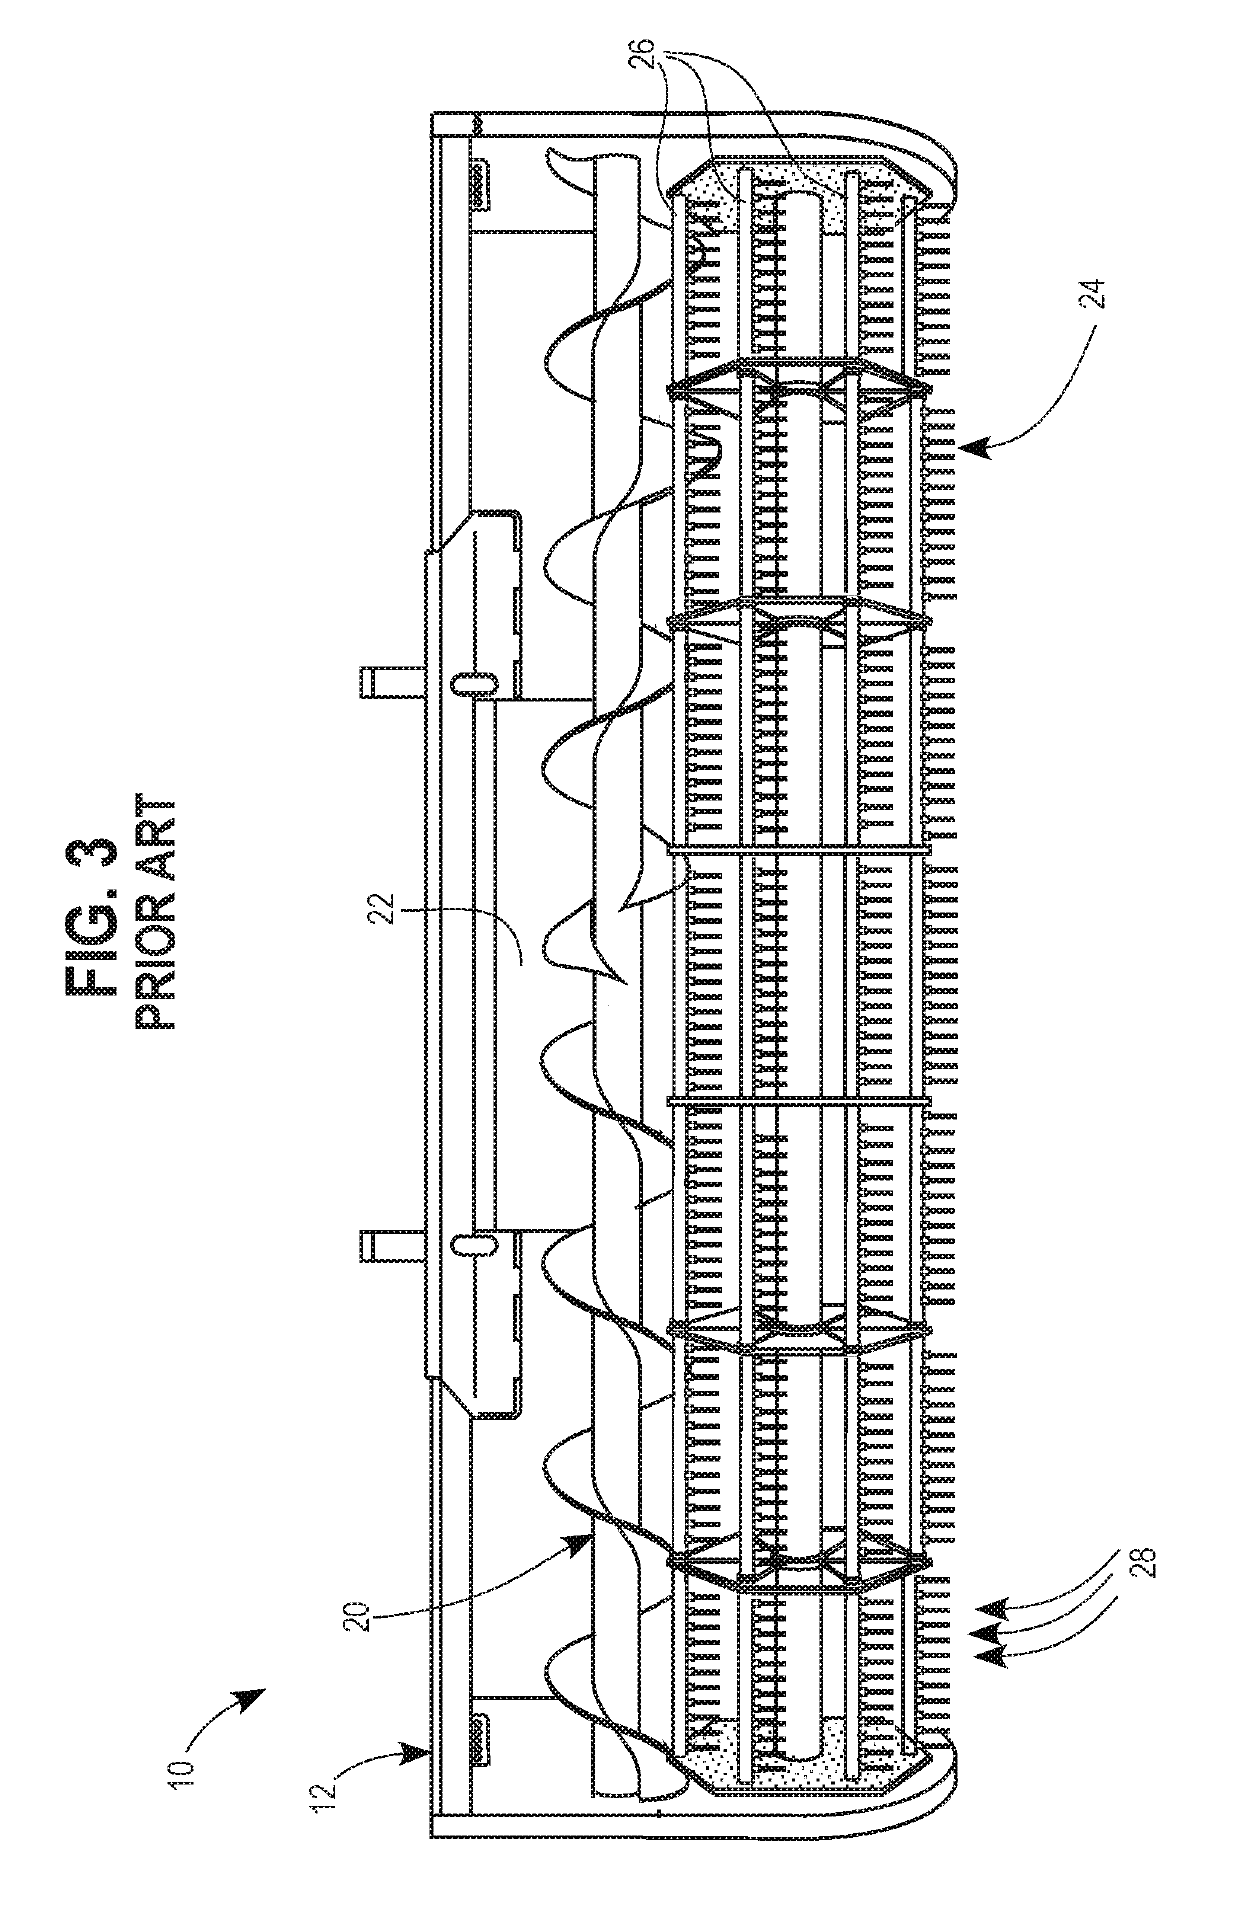 Crop yield and obstruction detection system for a harvesting header